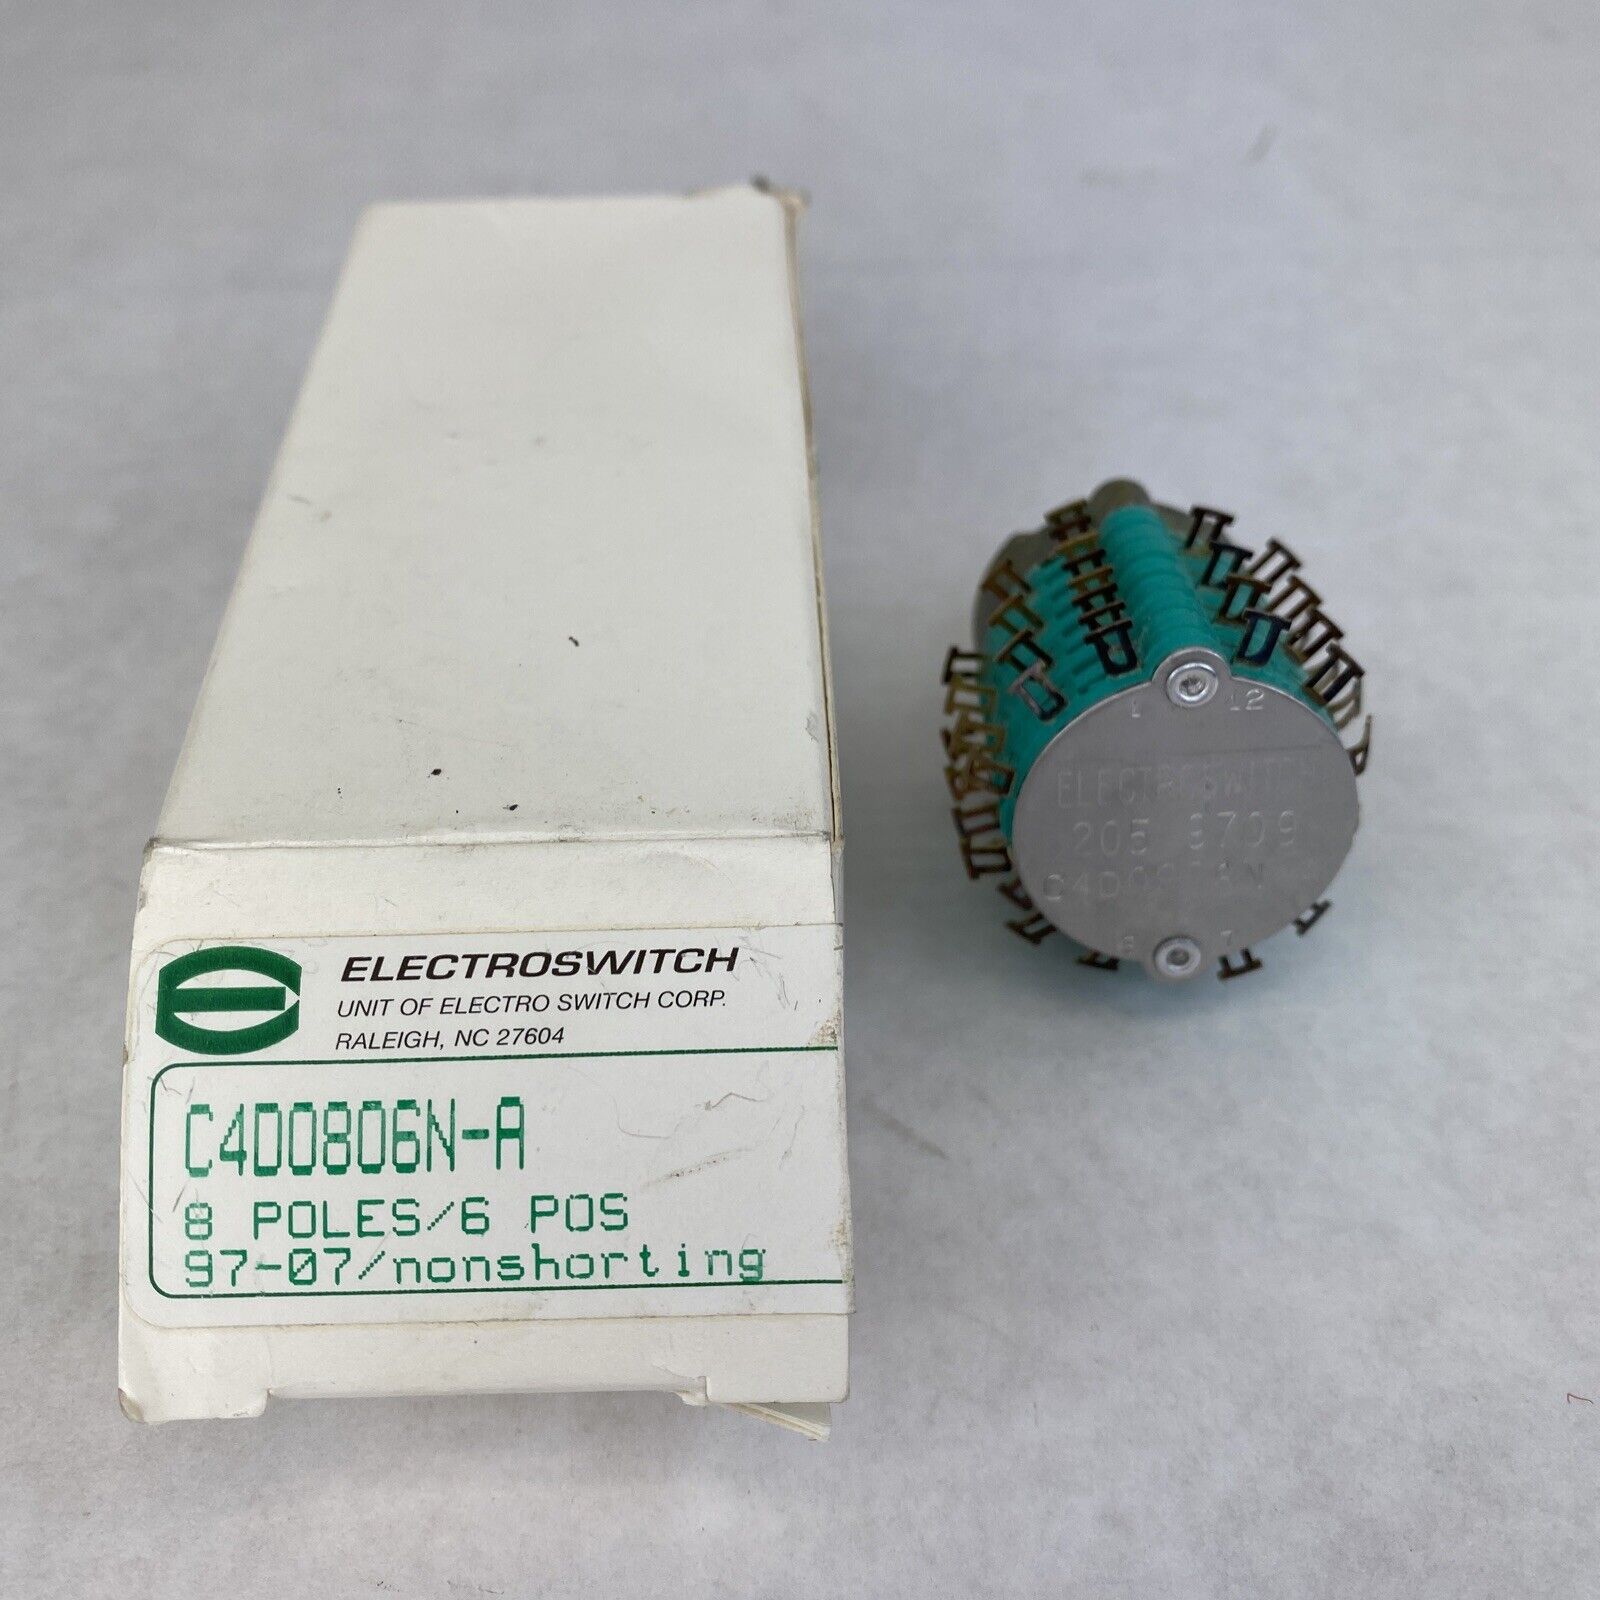 ELECTROSWITCH C4D0806N-A 8 Poles 6 Pos potentiometer New Old Stock